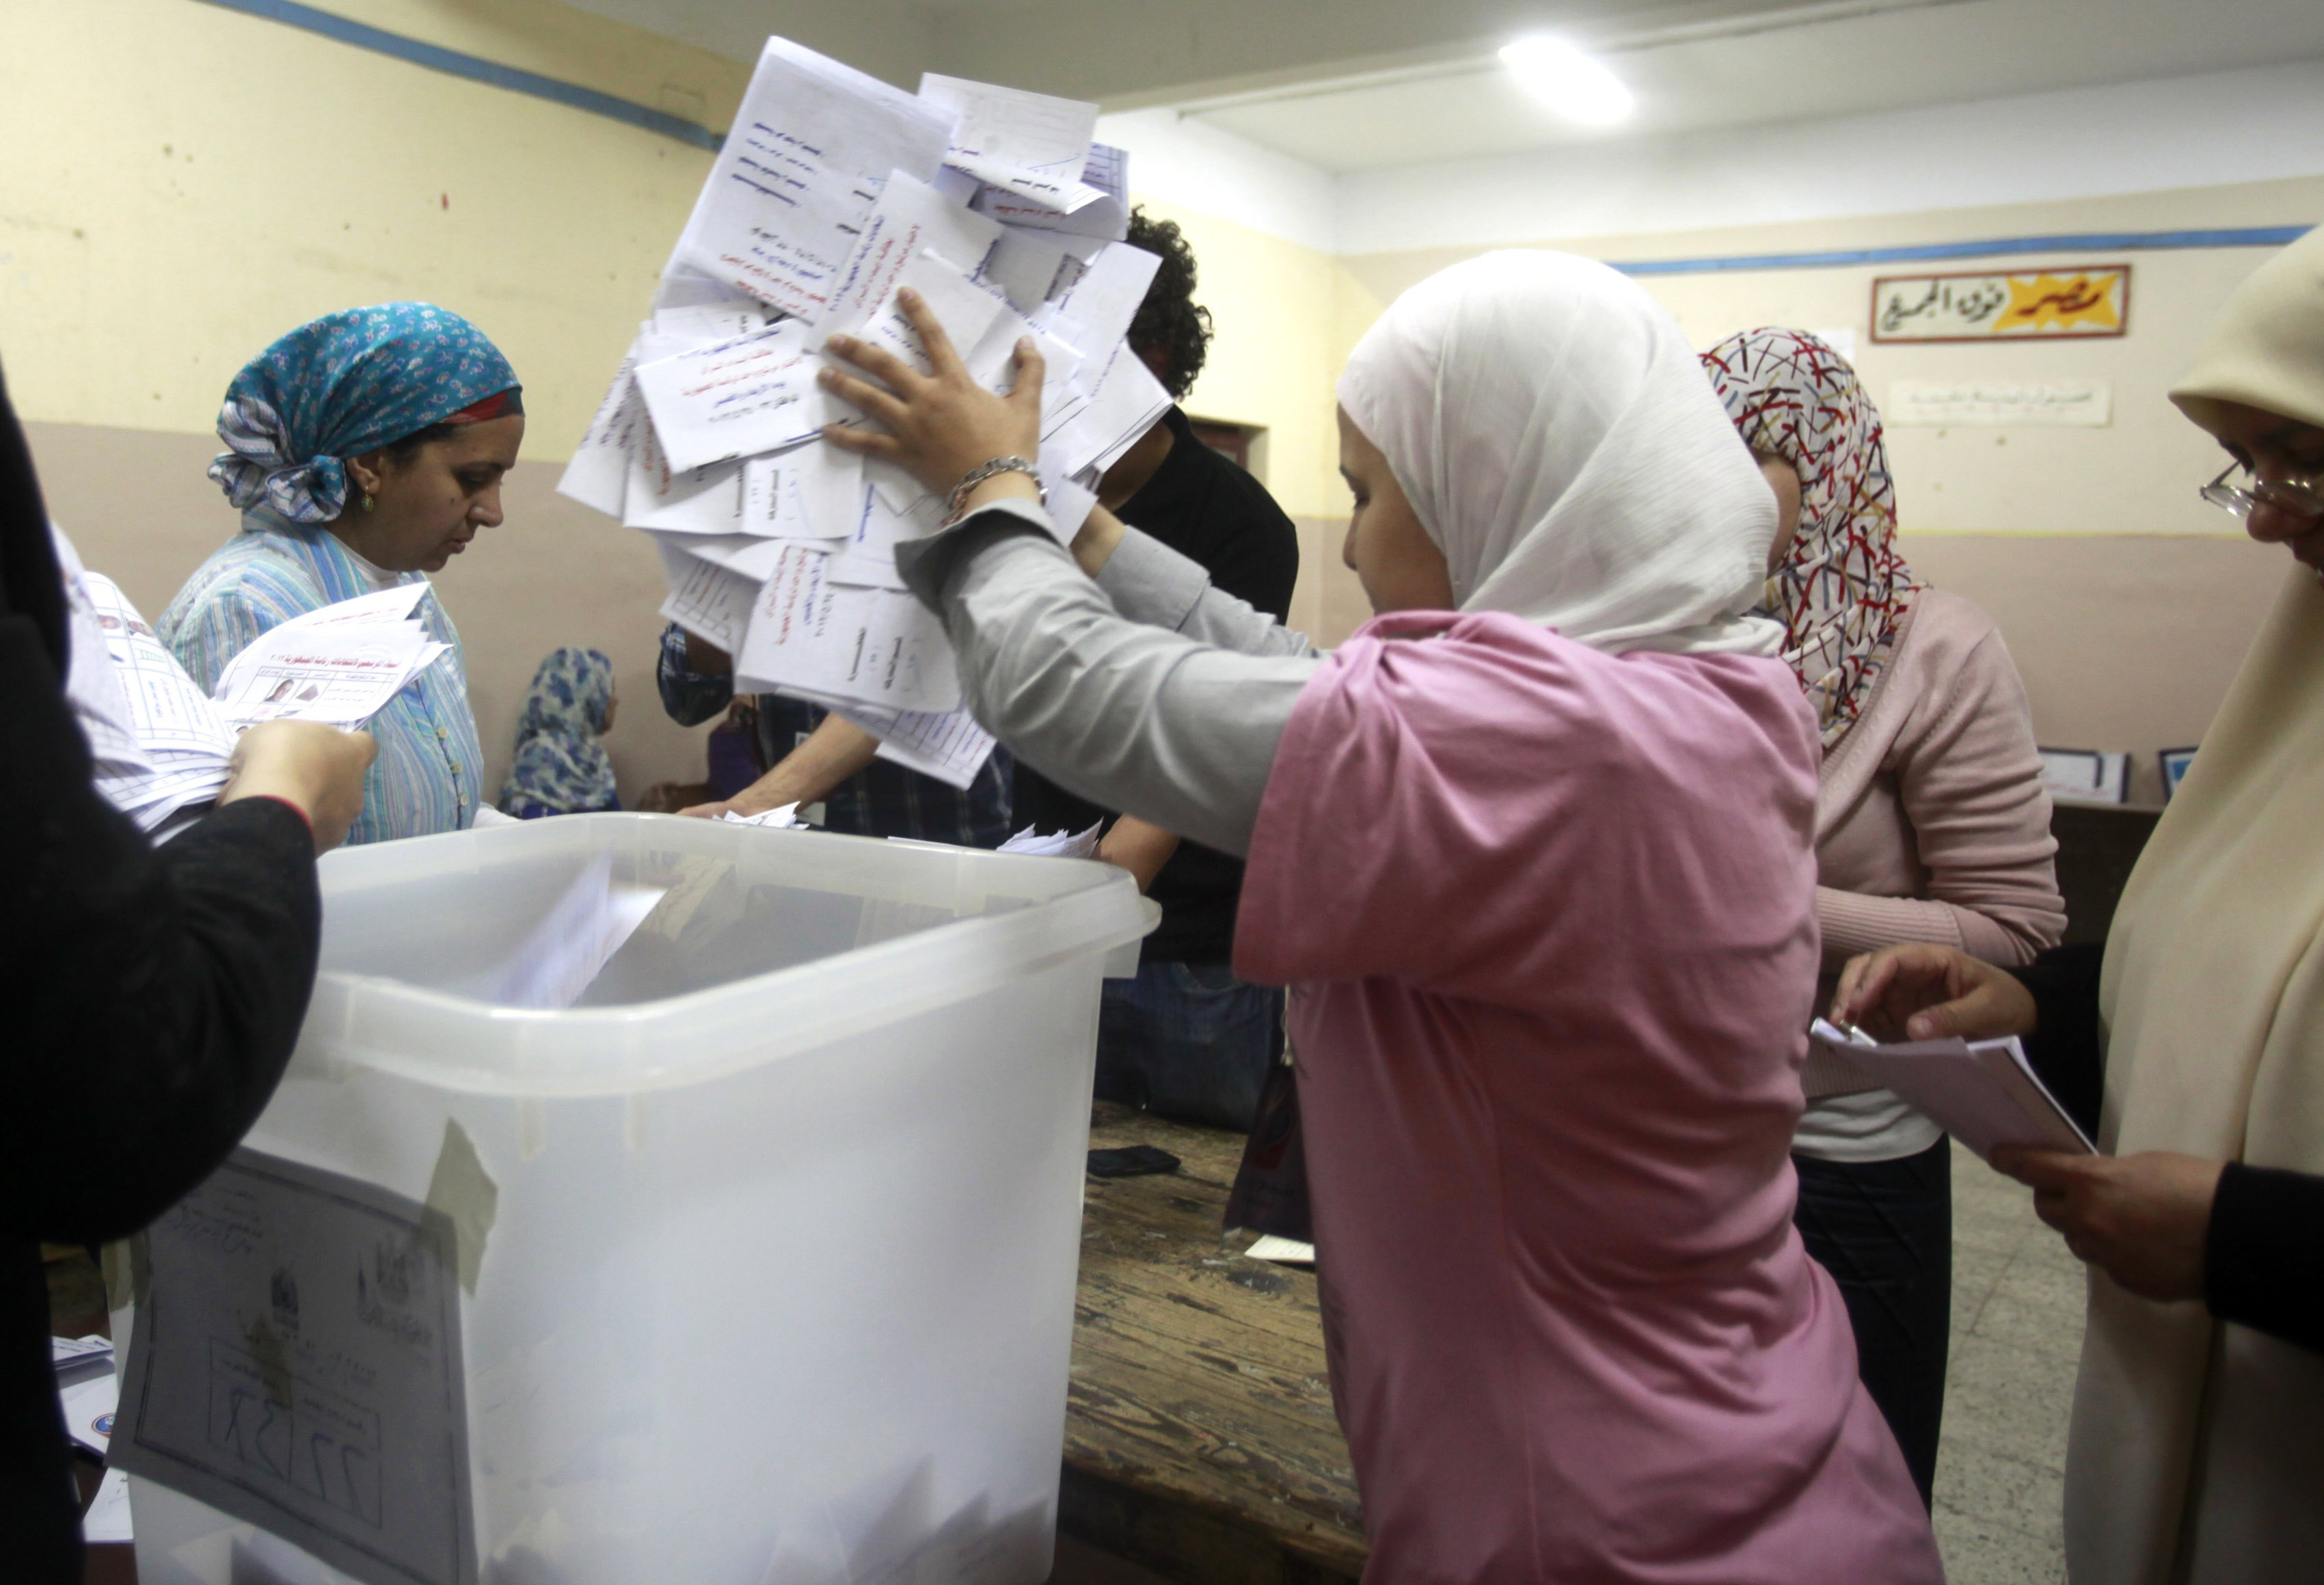 Judges for Egypt question increase in eligible voters in presidential elections